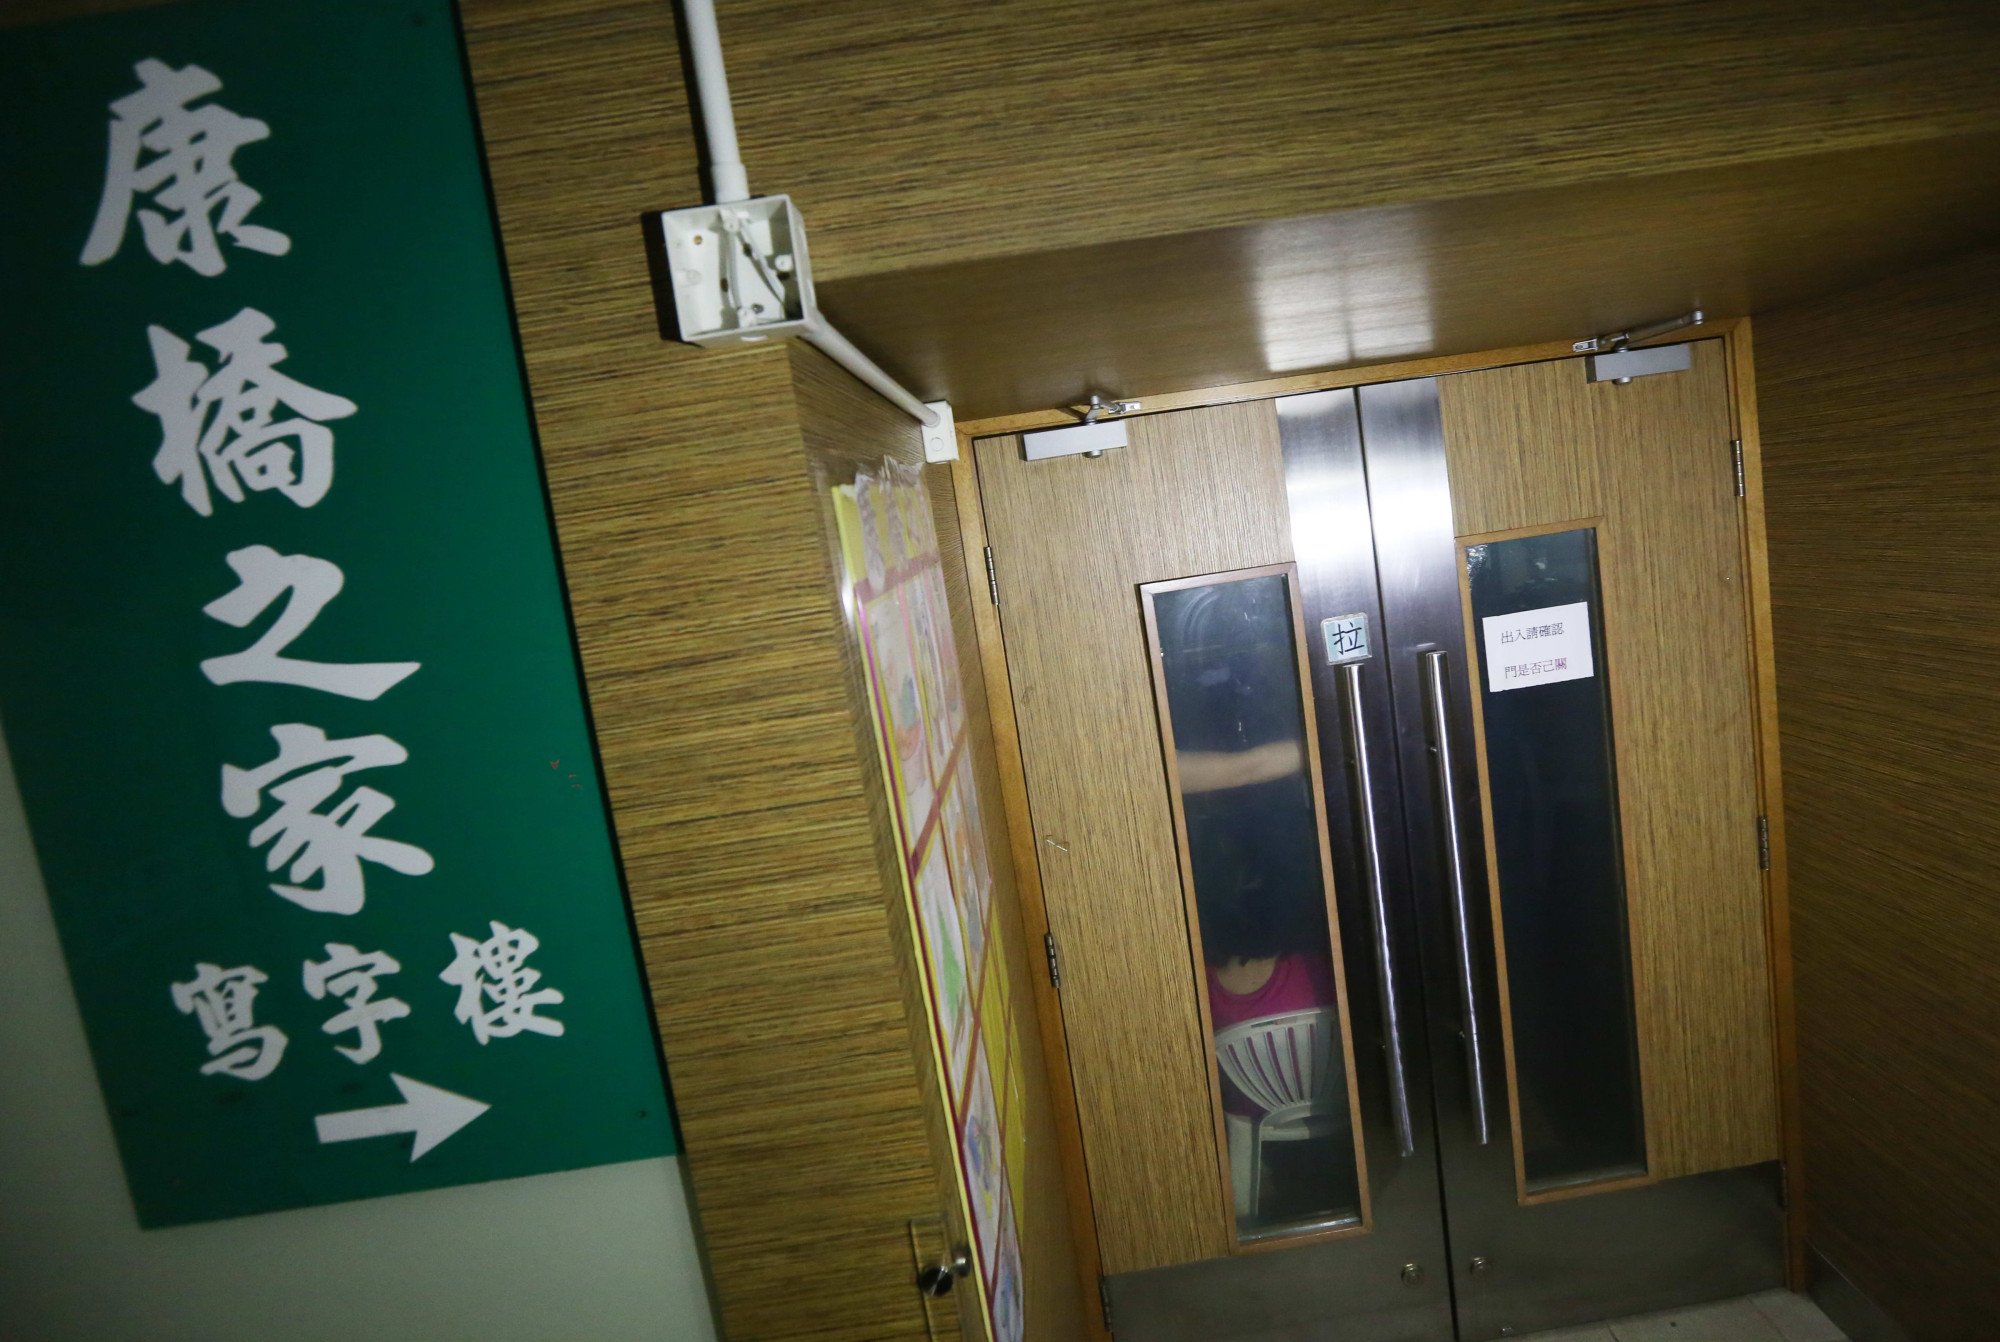 Bridge of Rehabilitation Home in Kwai Chung. The victim, who was said to have the mental age of an eight-year-old, was a resident of the home. Photo: SCMP